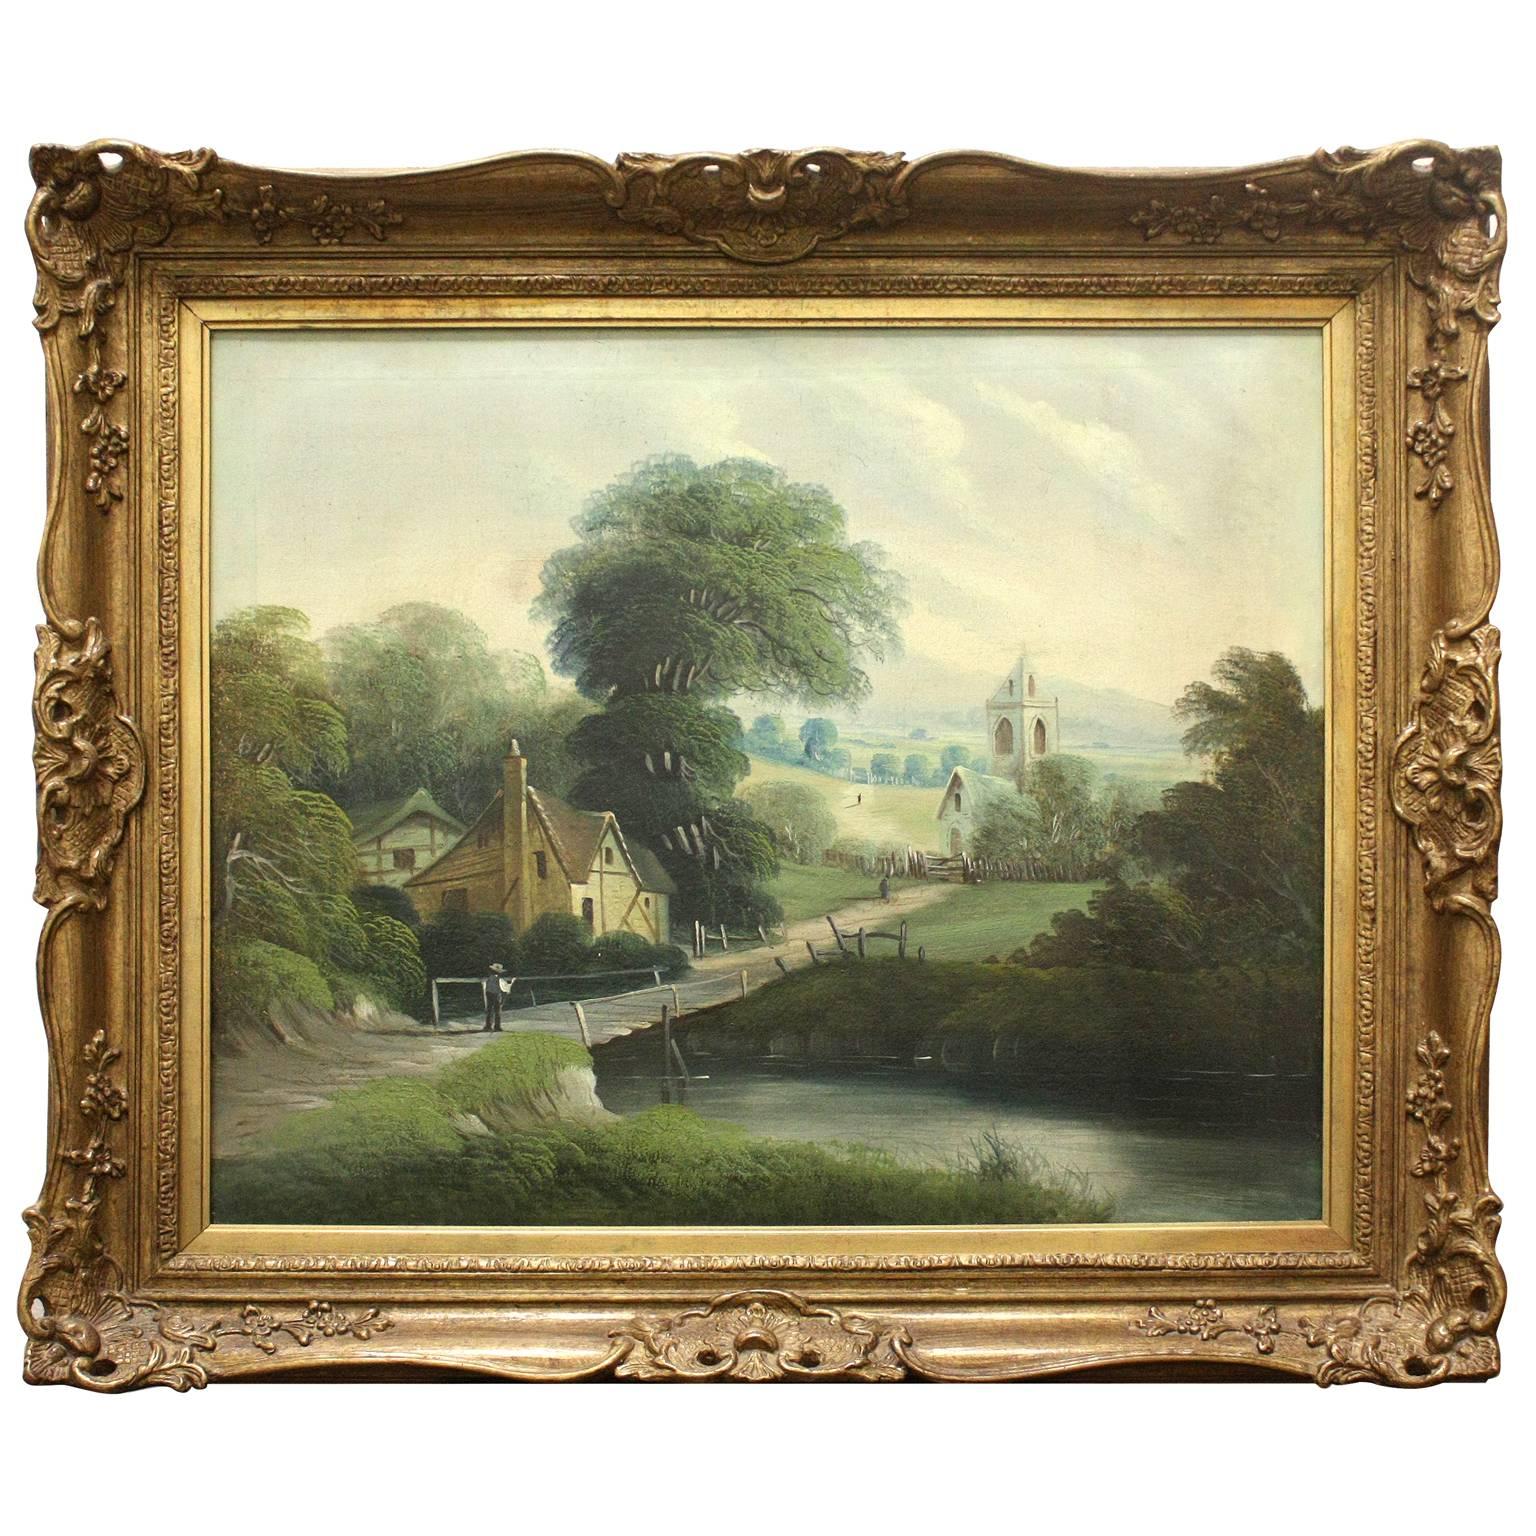 Great Britain (UK) Pair of 19th Century English Landscape Paintings